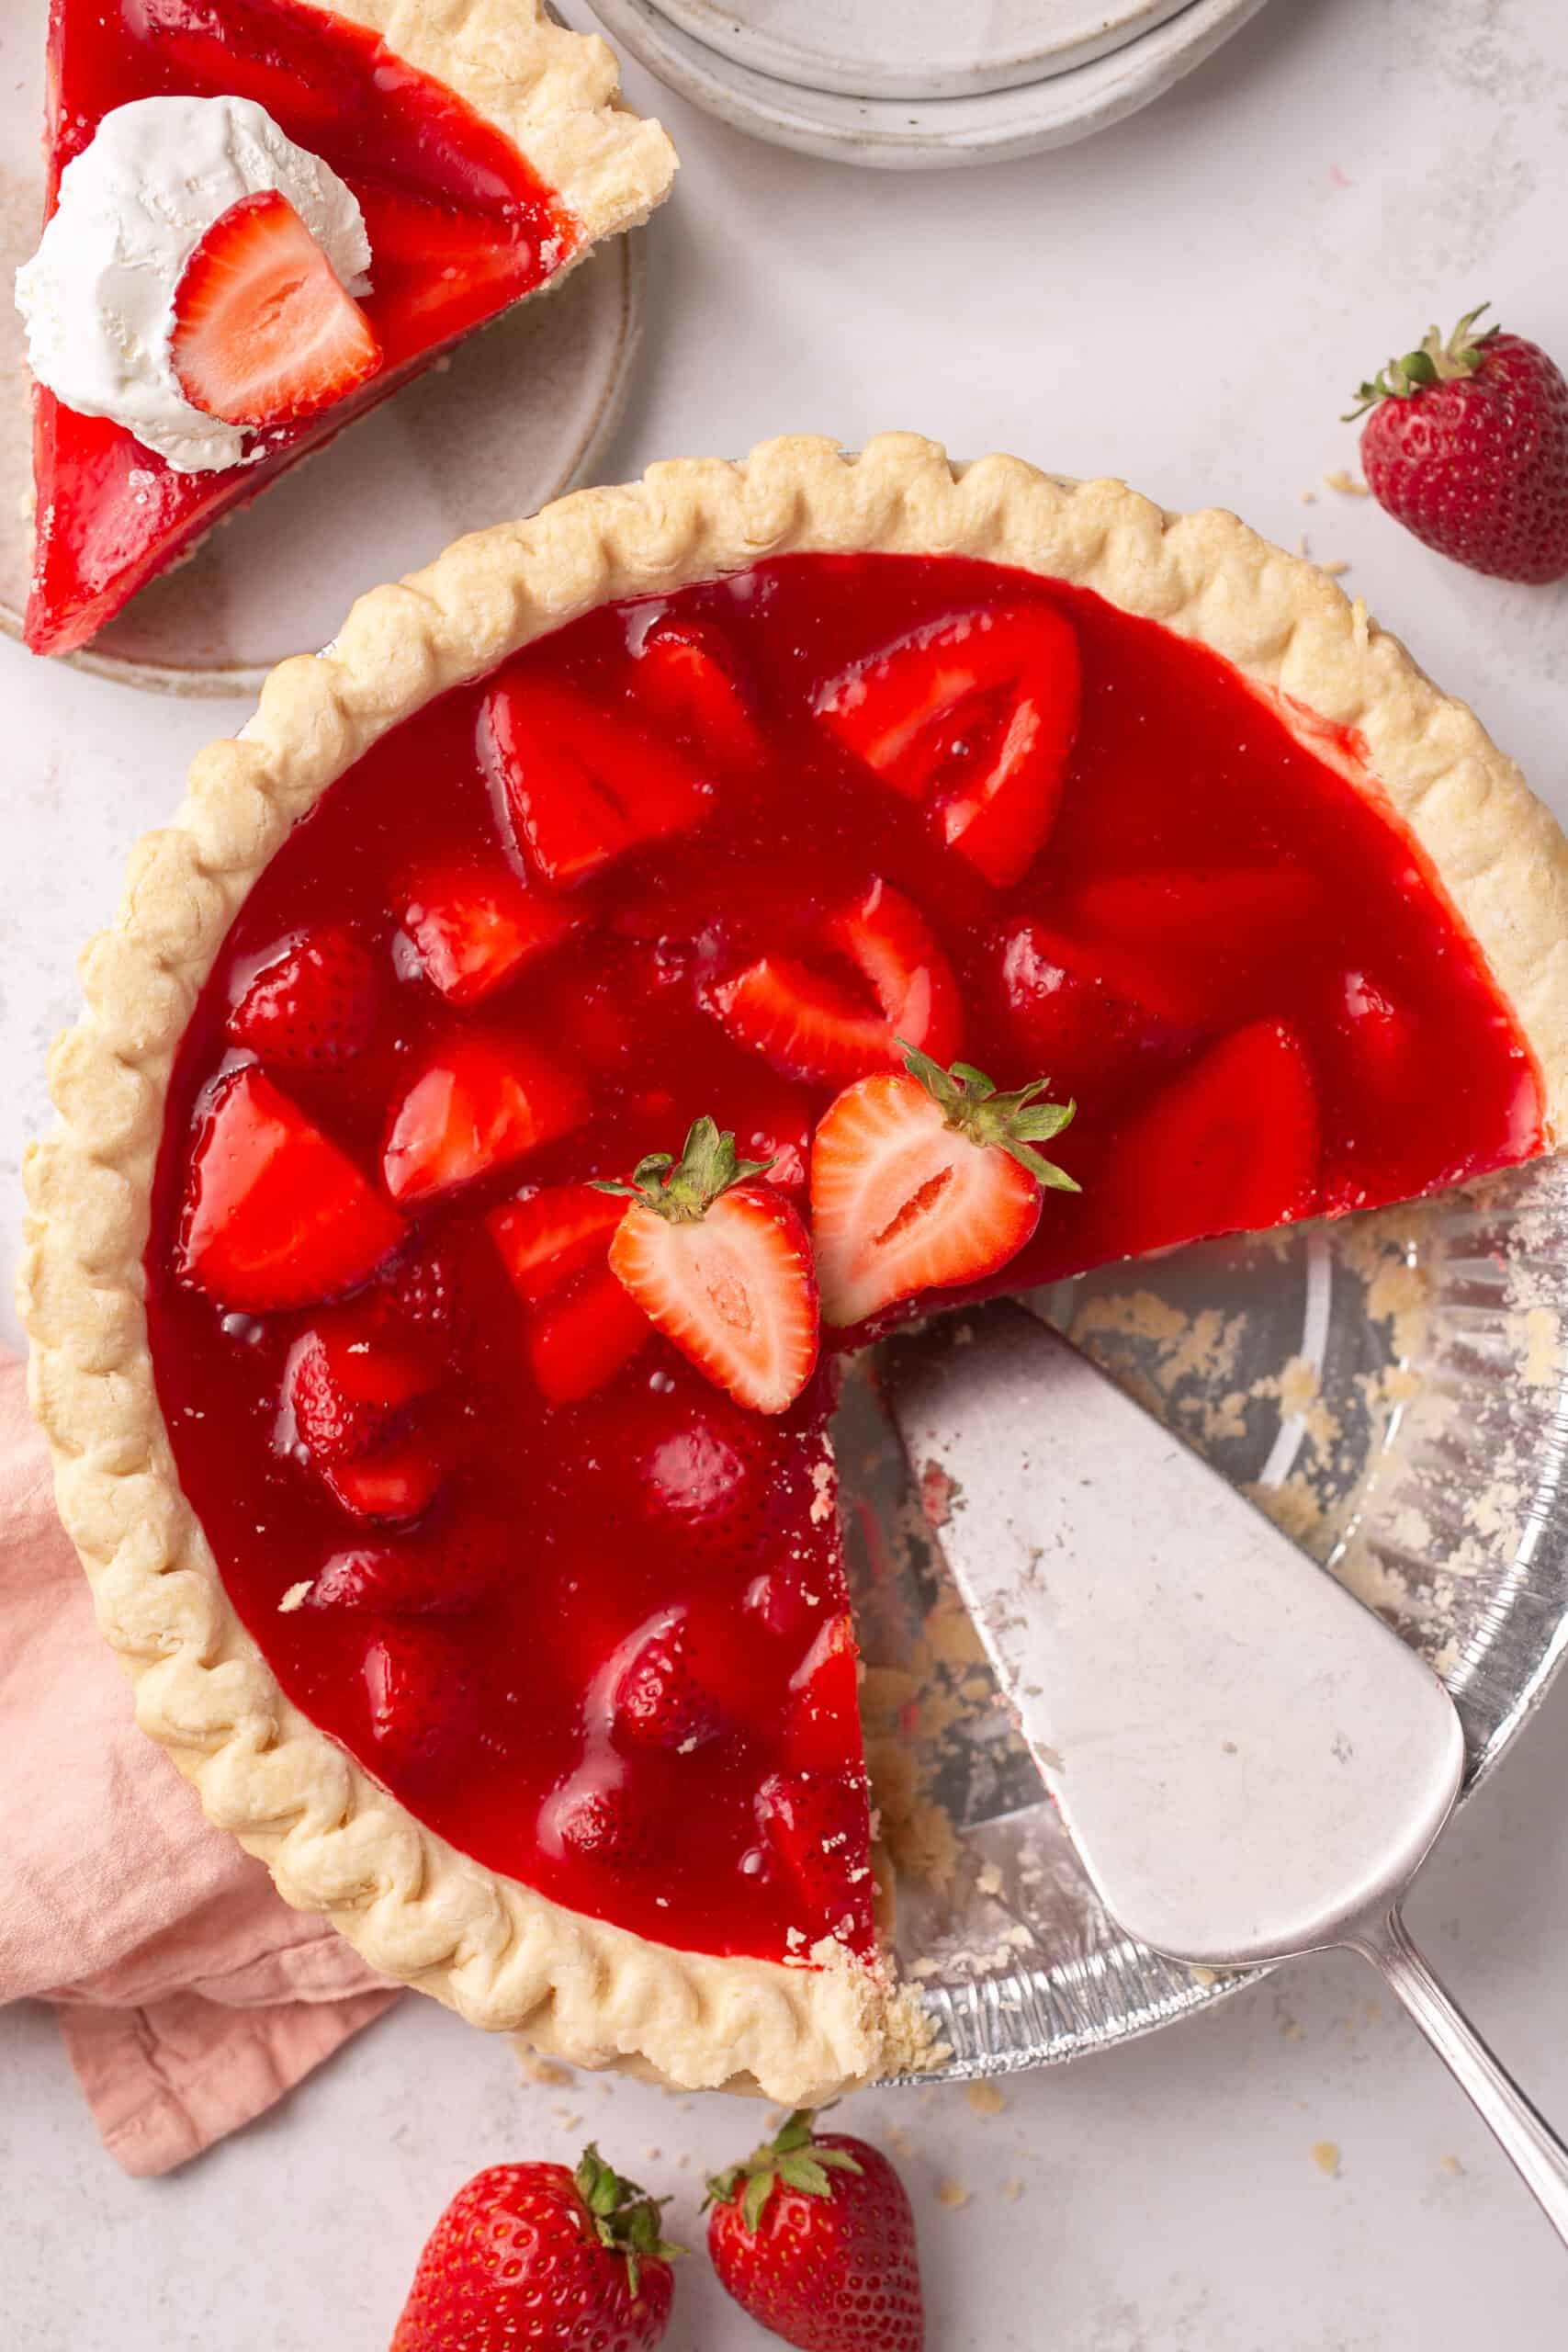 Strawberry pie with jello being sliced.